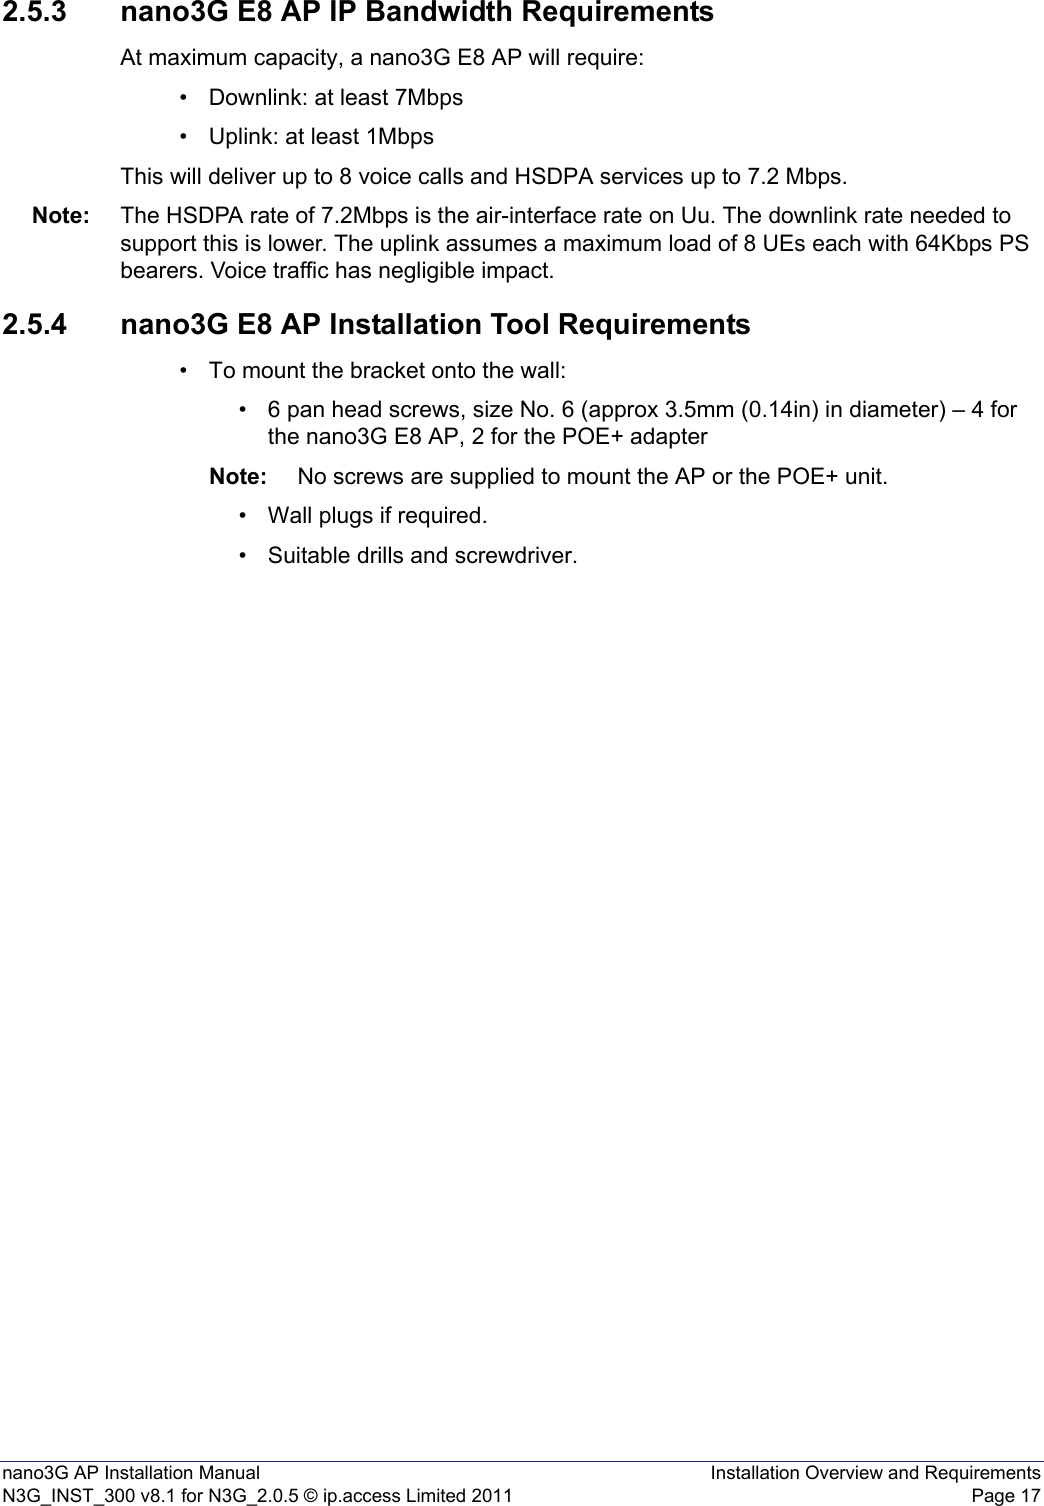 nano3G AP Installation Manual Installation Overview and RequirementsN3G_INST_300 v8.1 for N3G_2.0.5 © ip.access Limited 2011 Page 172.5.3 nano3G E8 AP IP Bandwidth RequirementsAt maximum capacity, a nano3G E8 AP will require:• Downlink: at least 7Mbps• Uplink: at least 1MbpsThis will deliver up to 8 voice calls and HSDPA services up to 7.2 Mbps.Note: The HSDPA rate of 7.2Mbps is the air-interface rate on Uu. The downlink rate needed to support this is lower. The uplink assumes a maximum load of 8 UEs each with 64Kbps PS bearers. Voice traffic has negligible impact. 2.5.4 nano3G E8 AP Installation Tool Requirements• To mount the bracket onto the wall:• 6 pan head screws, size No. 6 (approx 3.5mm (0.14in) in diameter) – 4 for the nano3G E8 AP, 2 for the POE+ adapterNote: No screws are supplied to mount the AP or the POE+ unit.• Wall plugs if required.• Suitable drills and screwdriver.